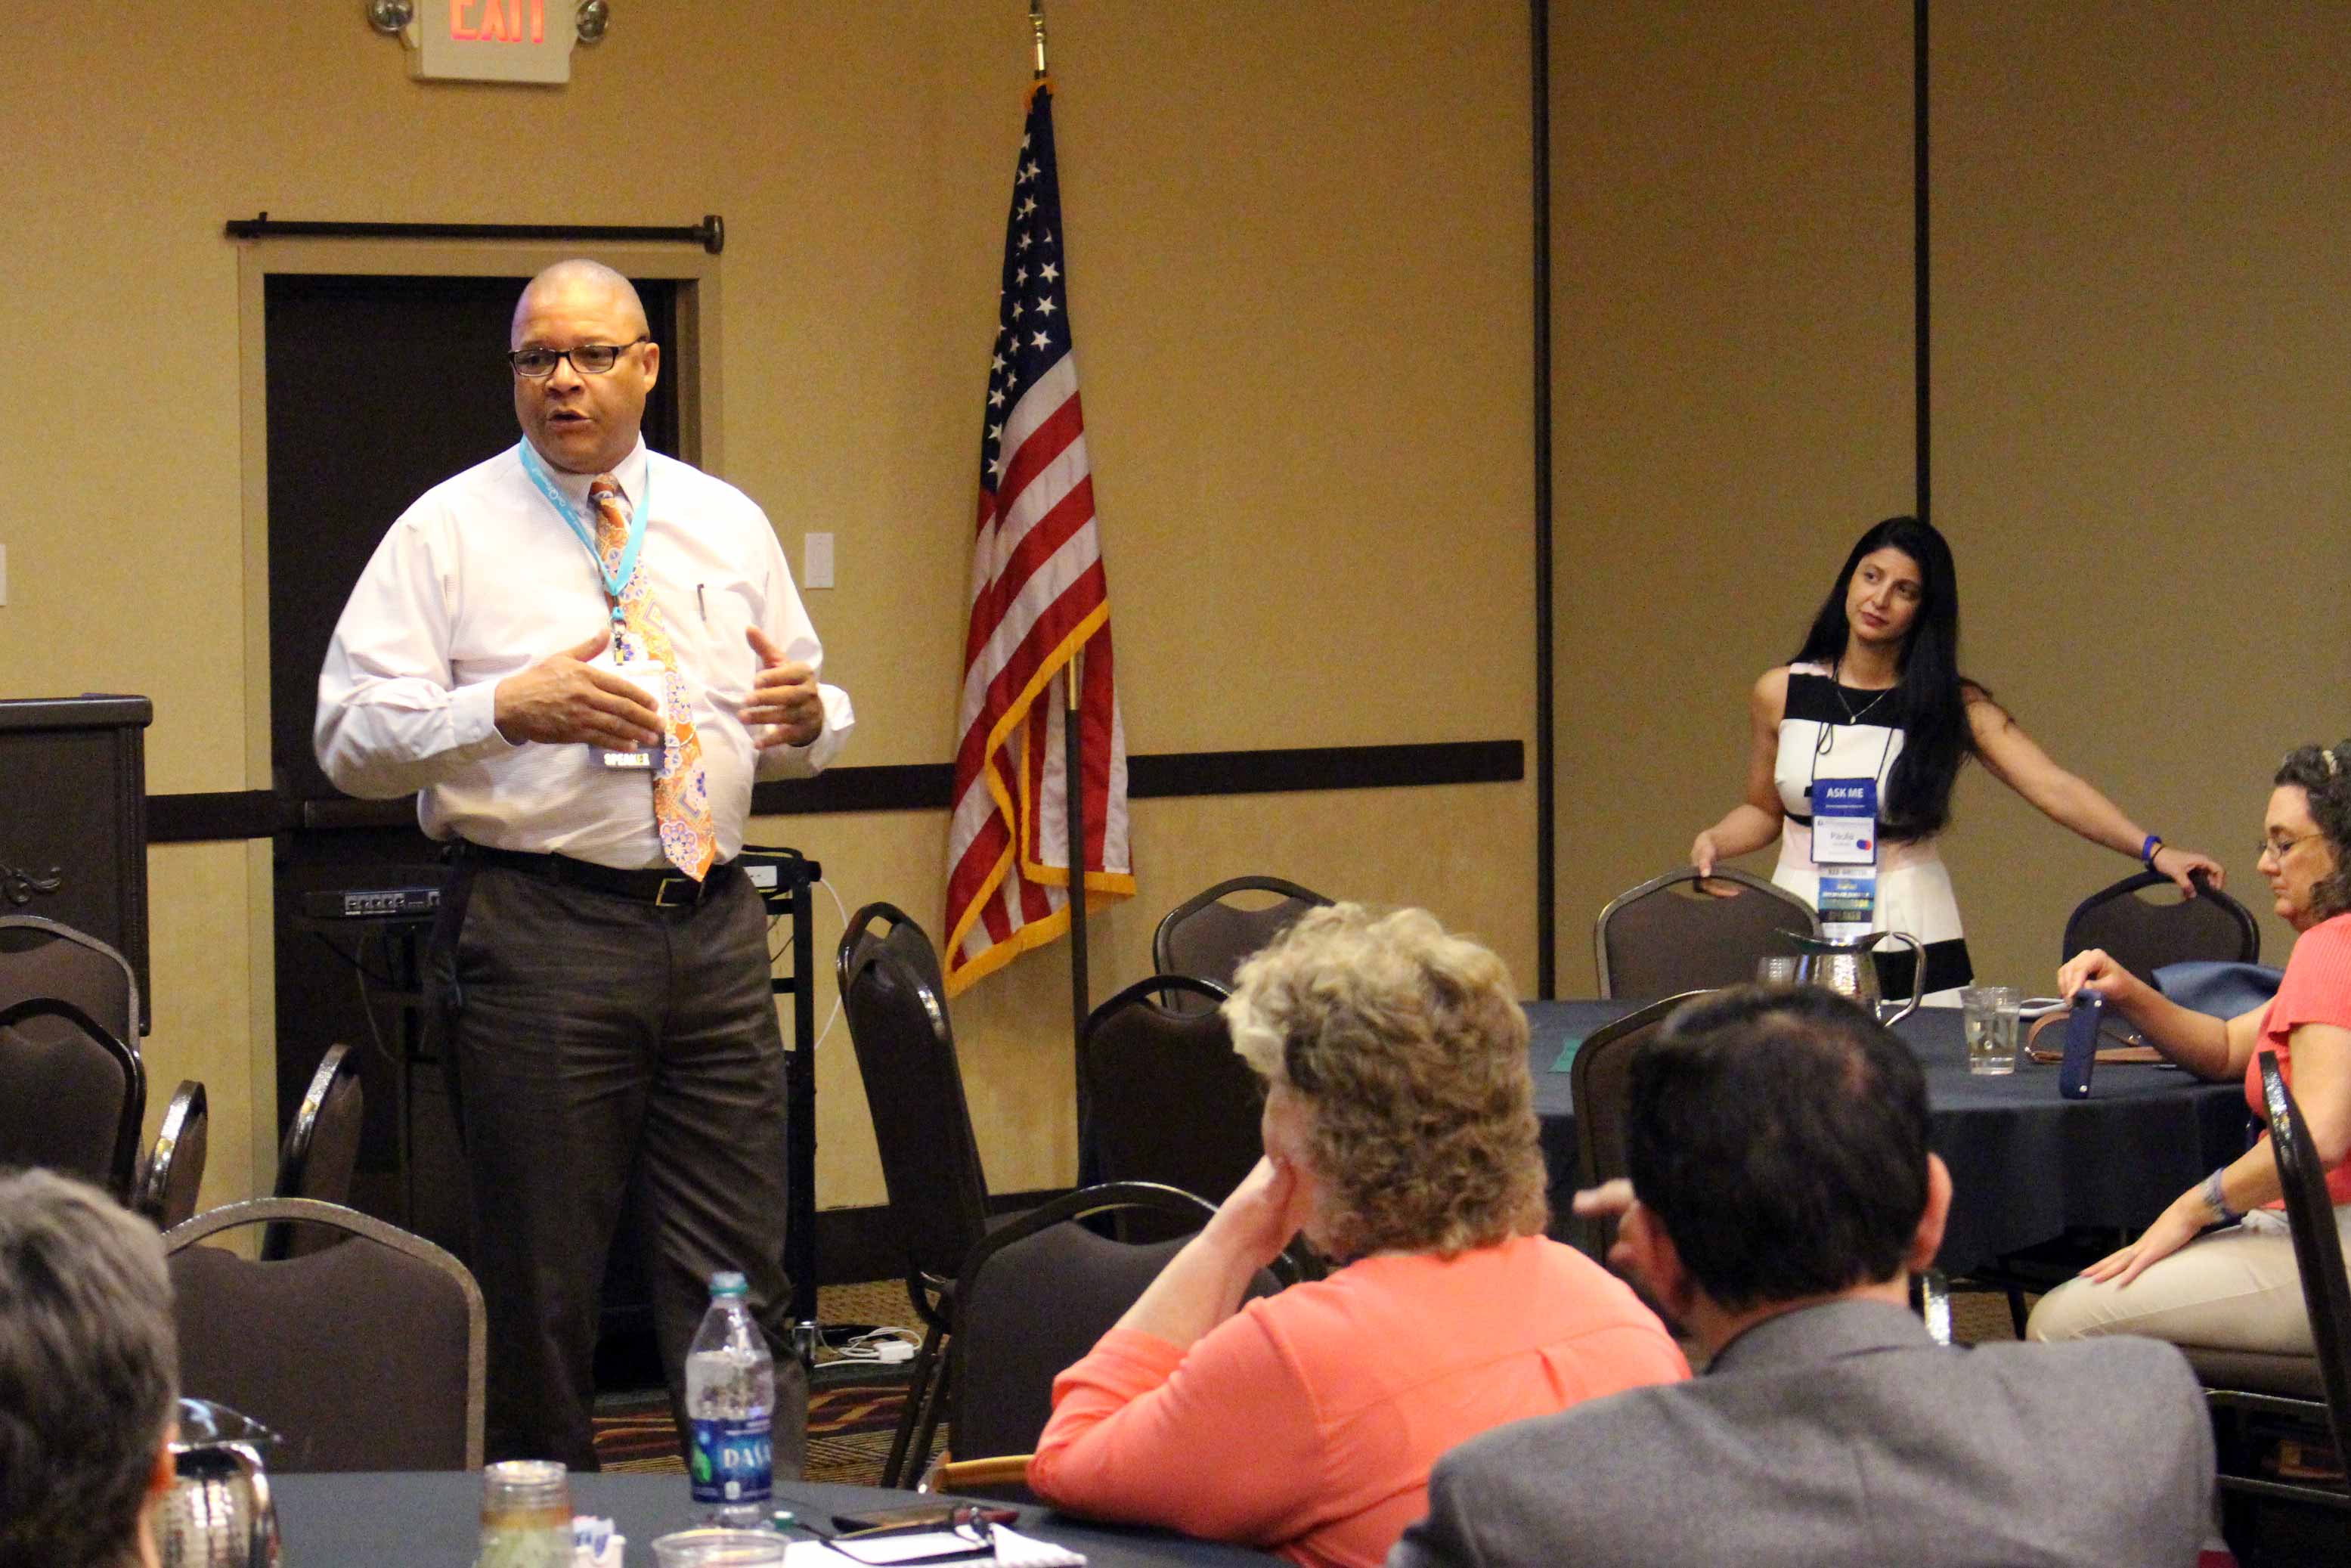 Eric Gibbs, Sr. promotes REALTOR® Safety during the 2016 Spring Conference.